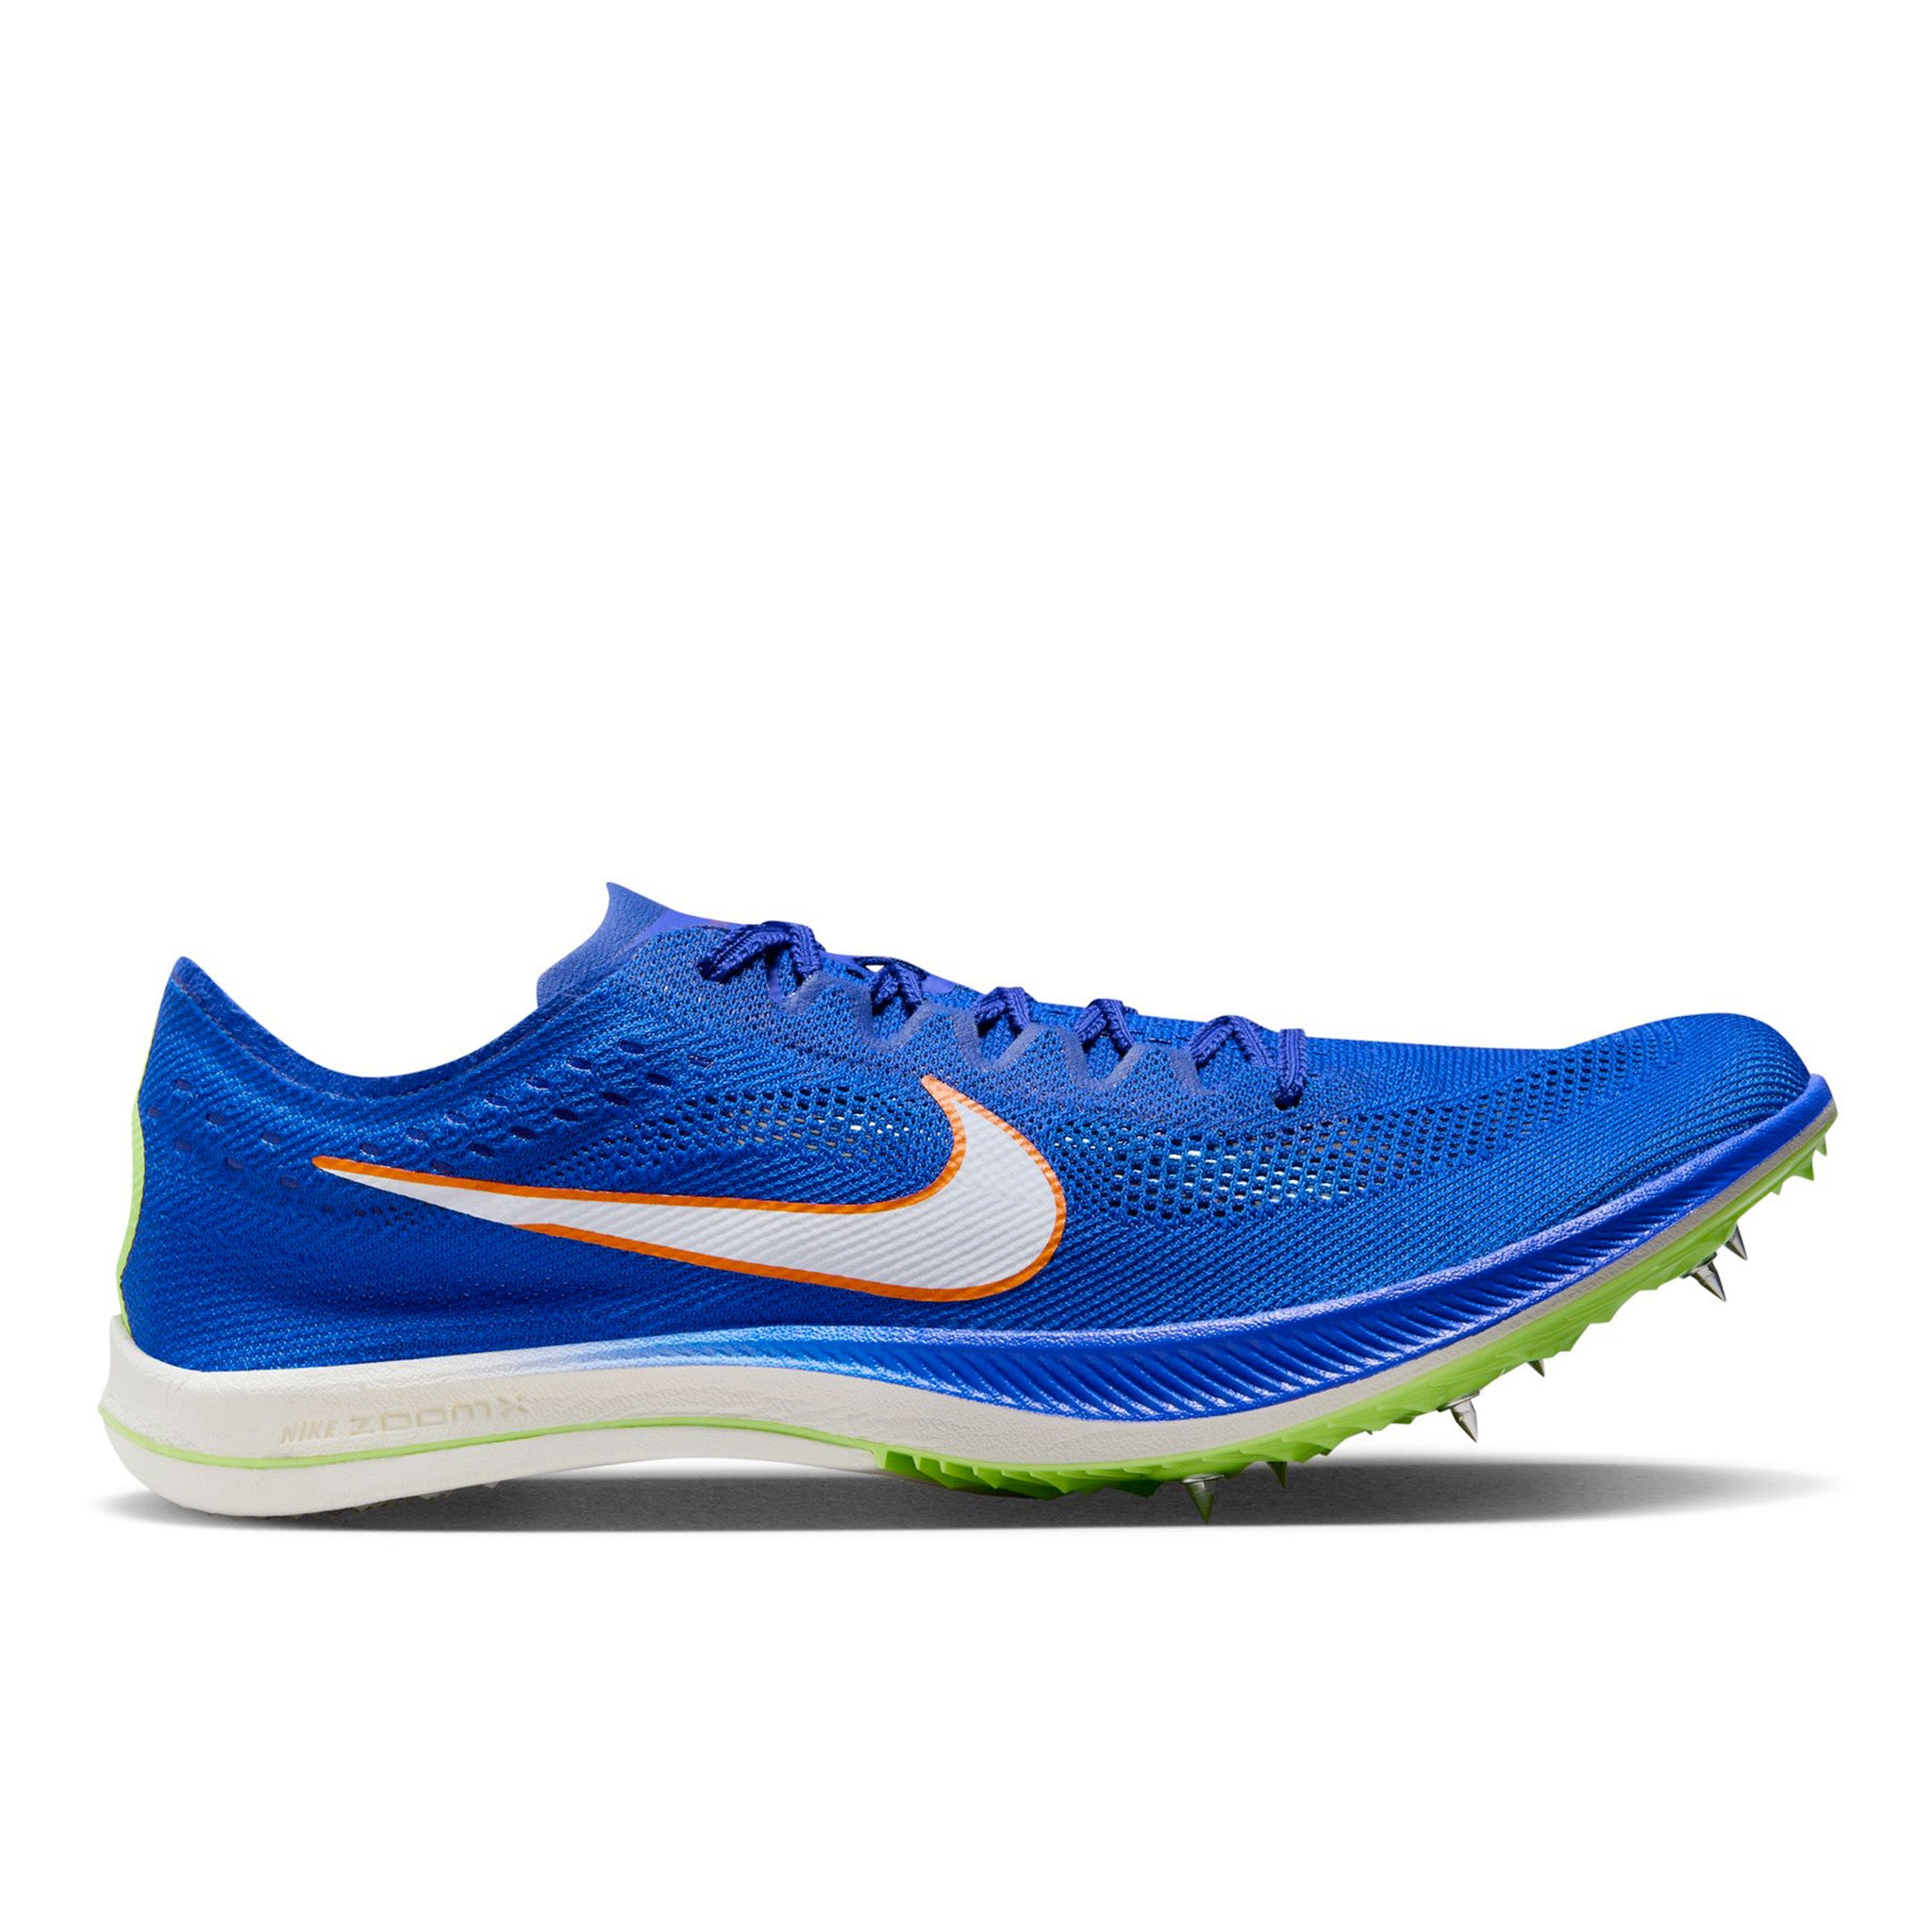 NIKE ZOOMX DRAGONFLY - UNISEXE - Le Coureur